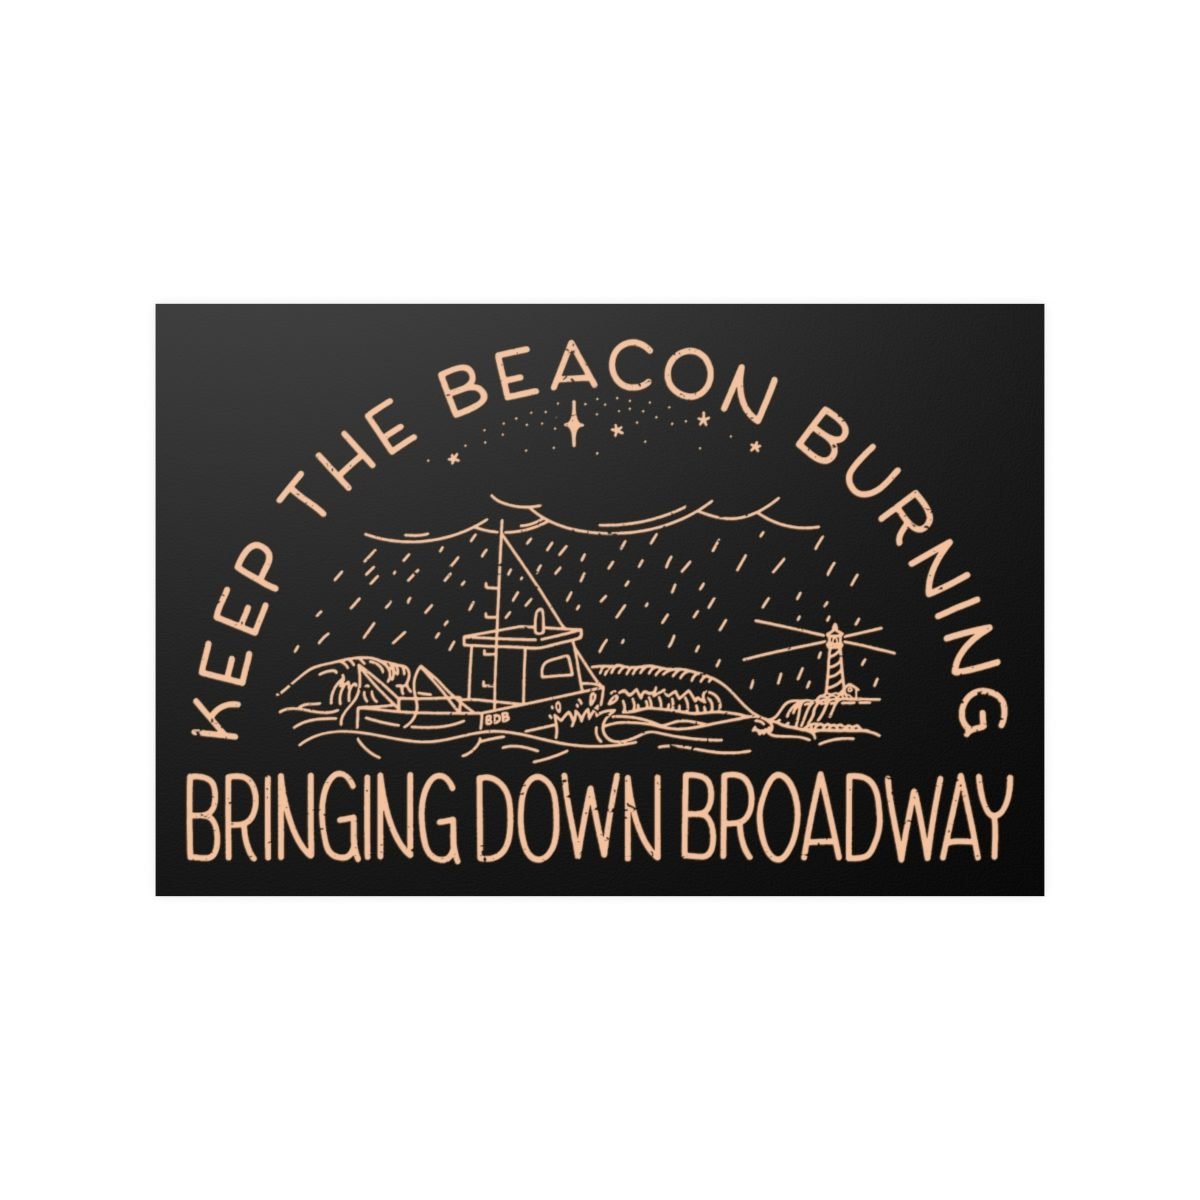 Bringing Down Broadway – Beacon Posters